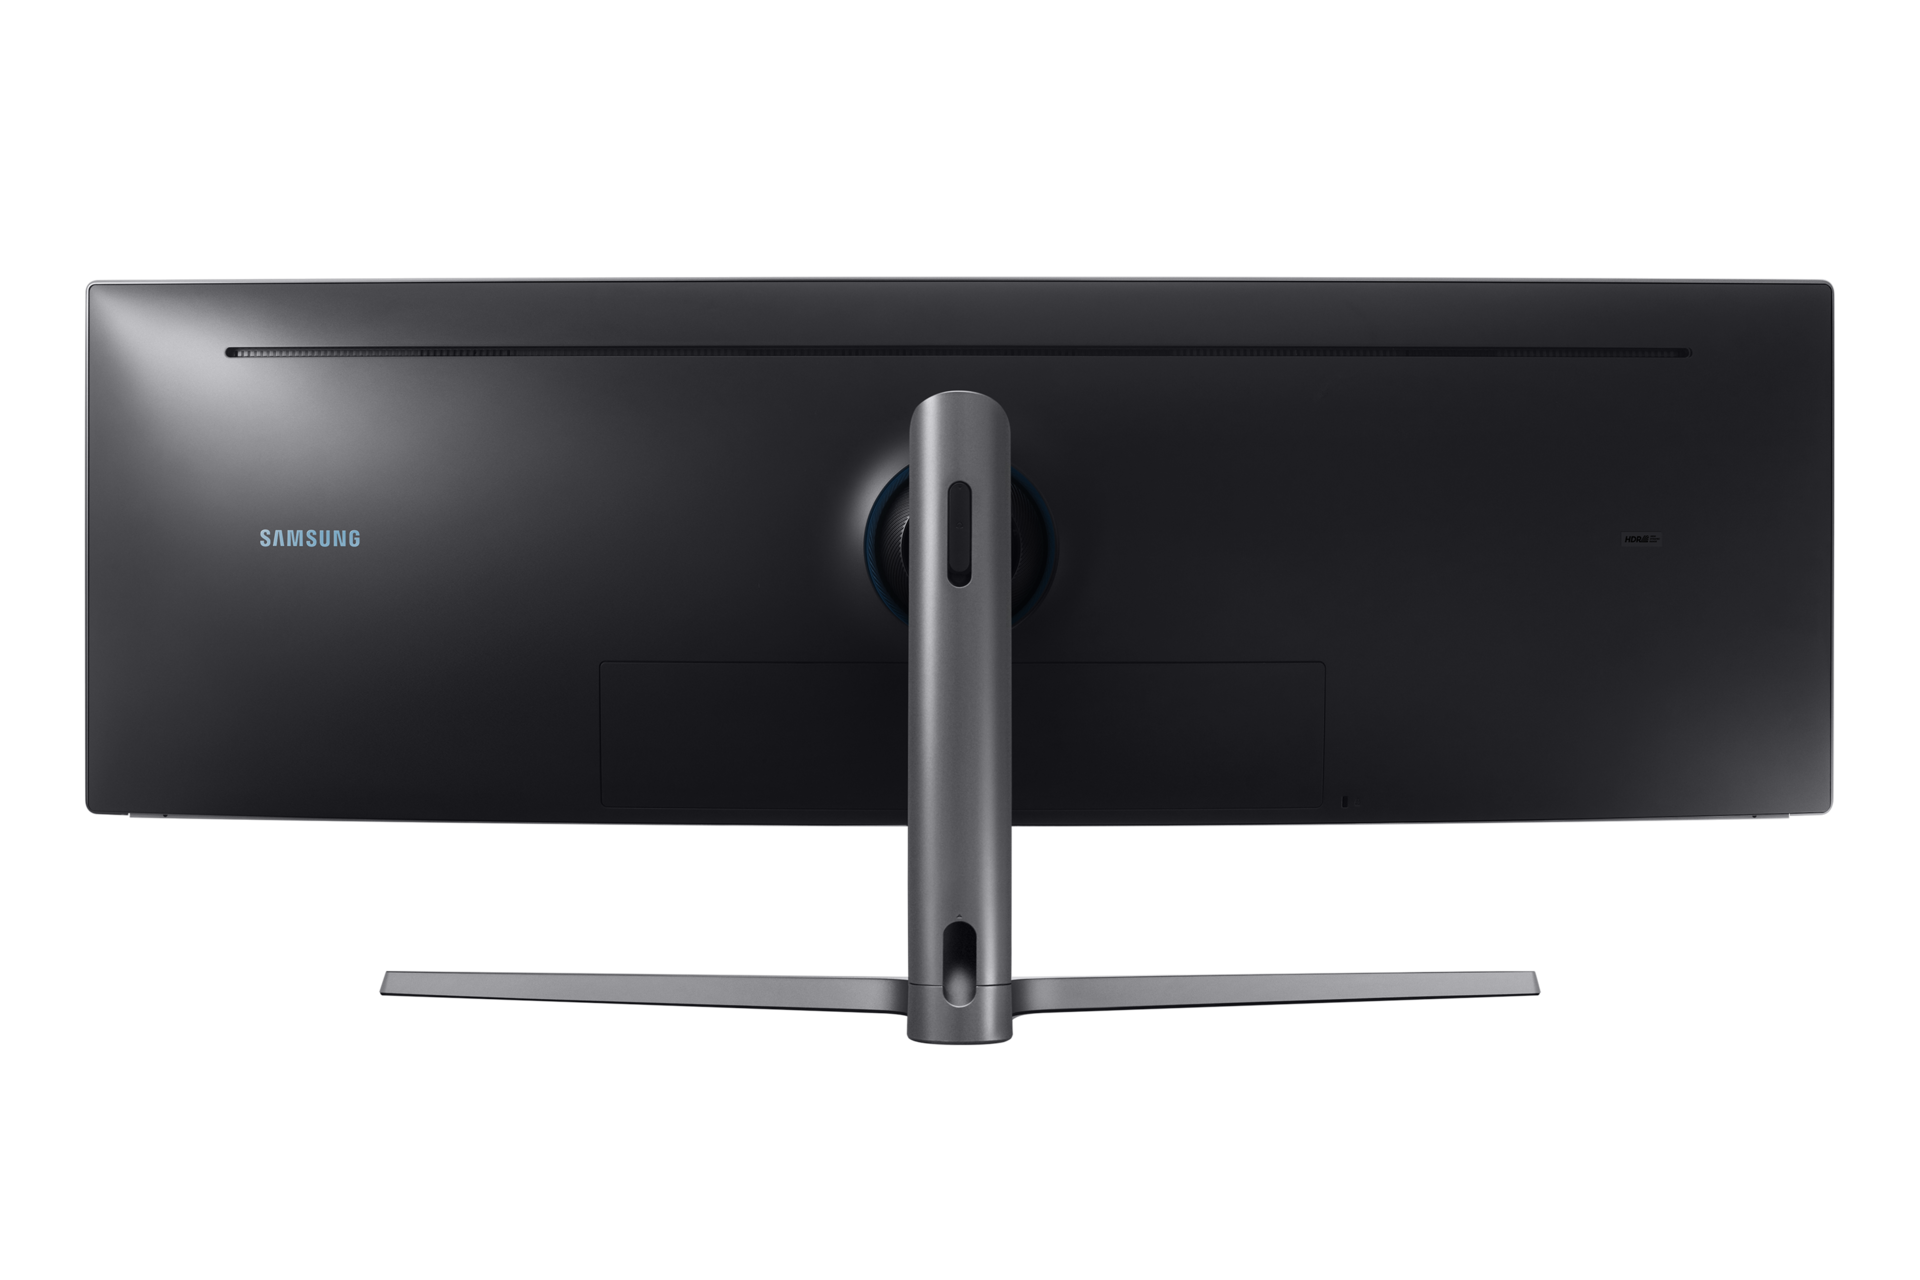 49 Curved Monitor Chg90 With A Super Ultra Wide Screen Lc49hg90dmnxza Samsung South Africa